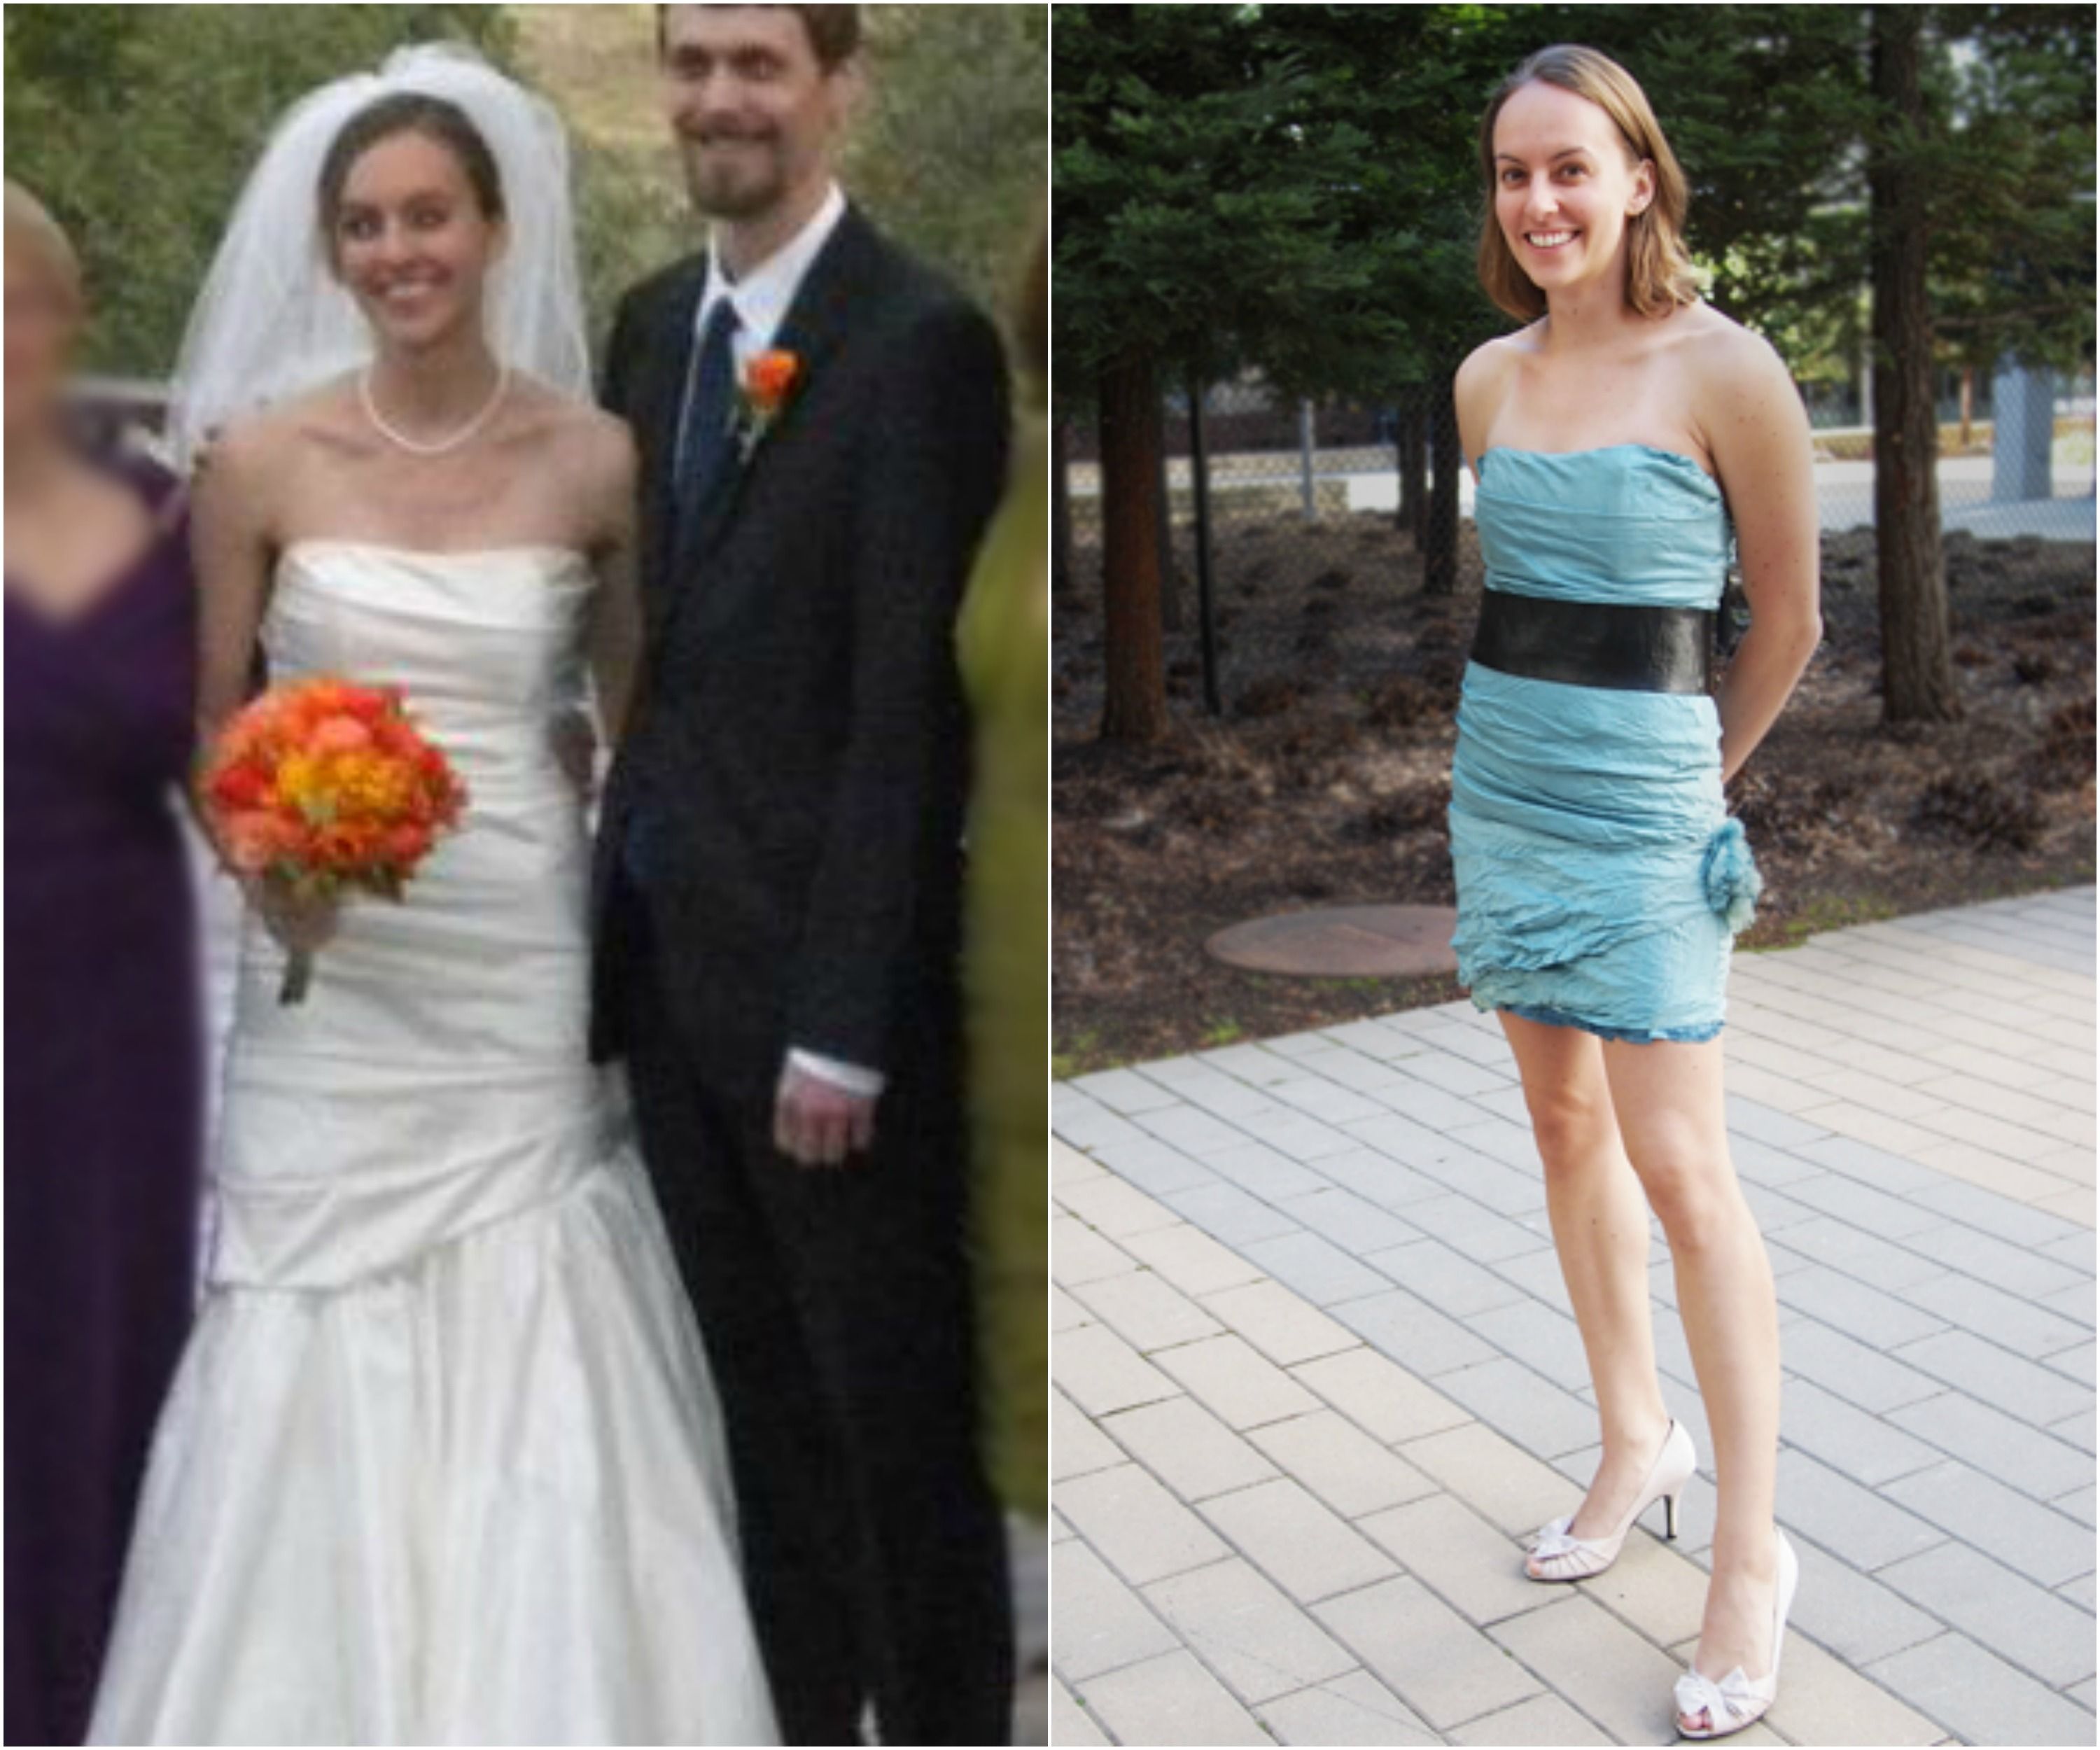 9 Wedding Dress Transformations That Are Seriously Incredible